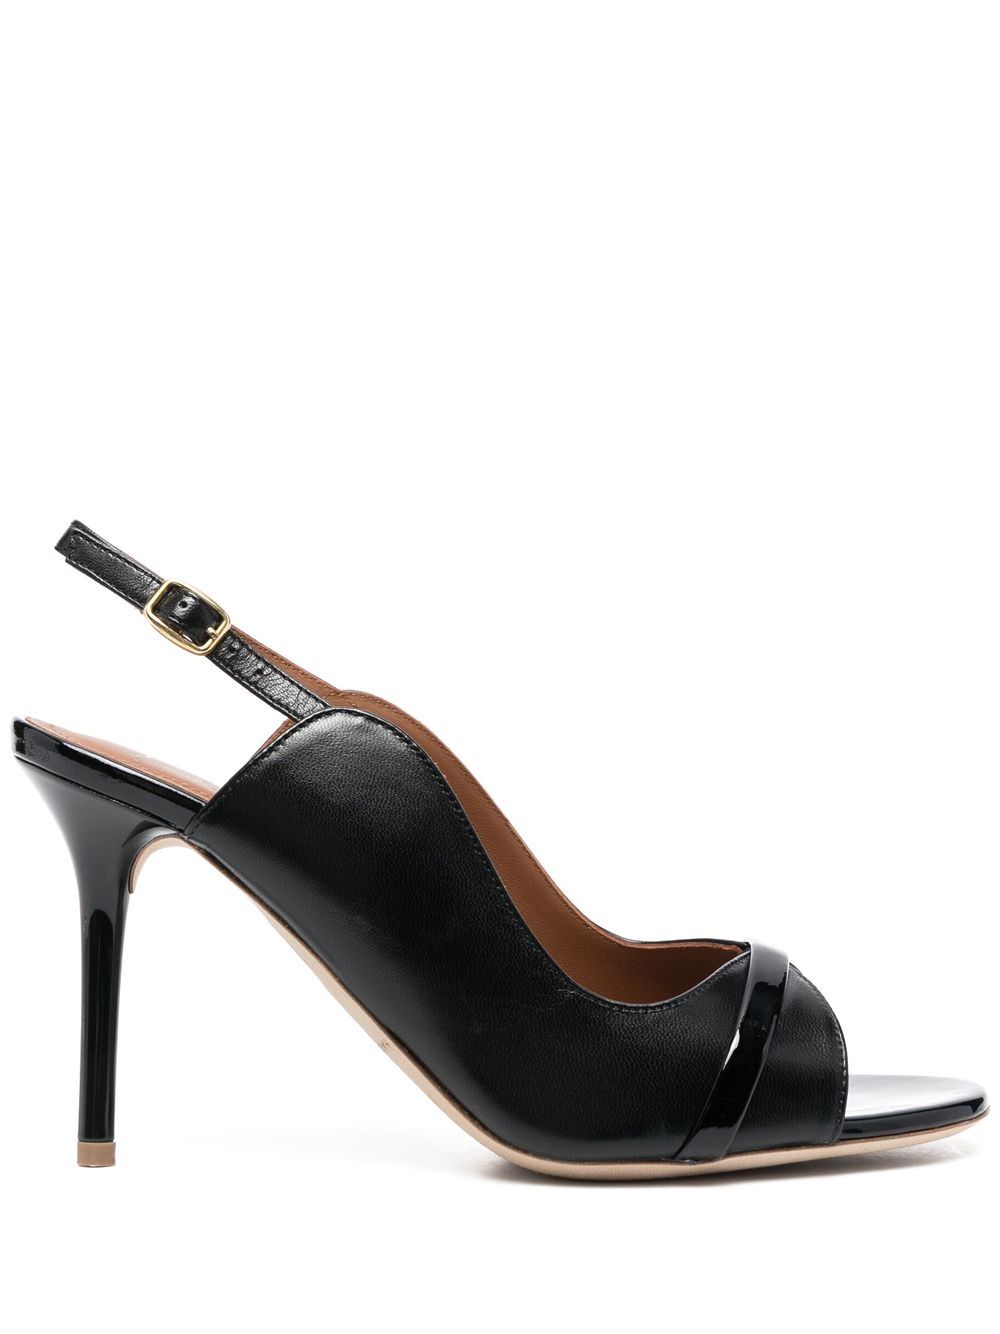 Image 1 of Malone Souliers Jenny 70mm slingback sandals